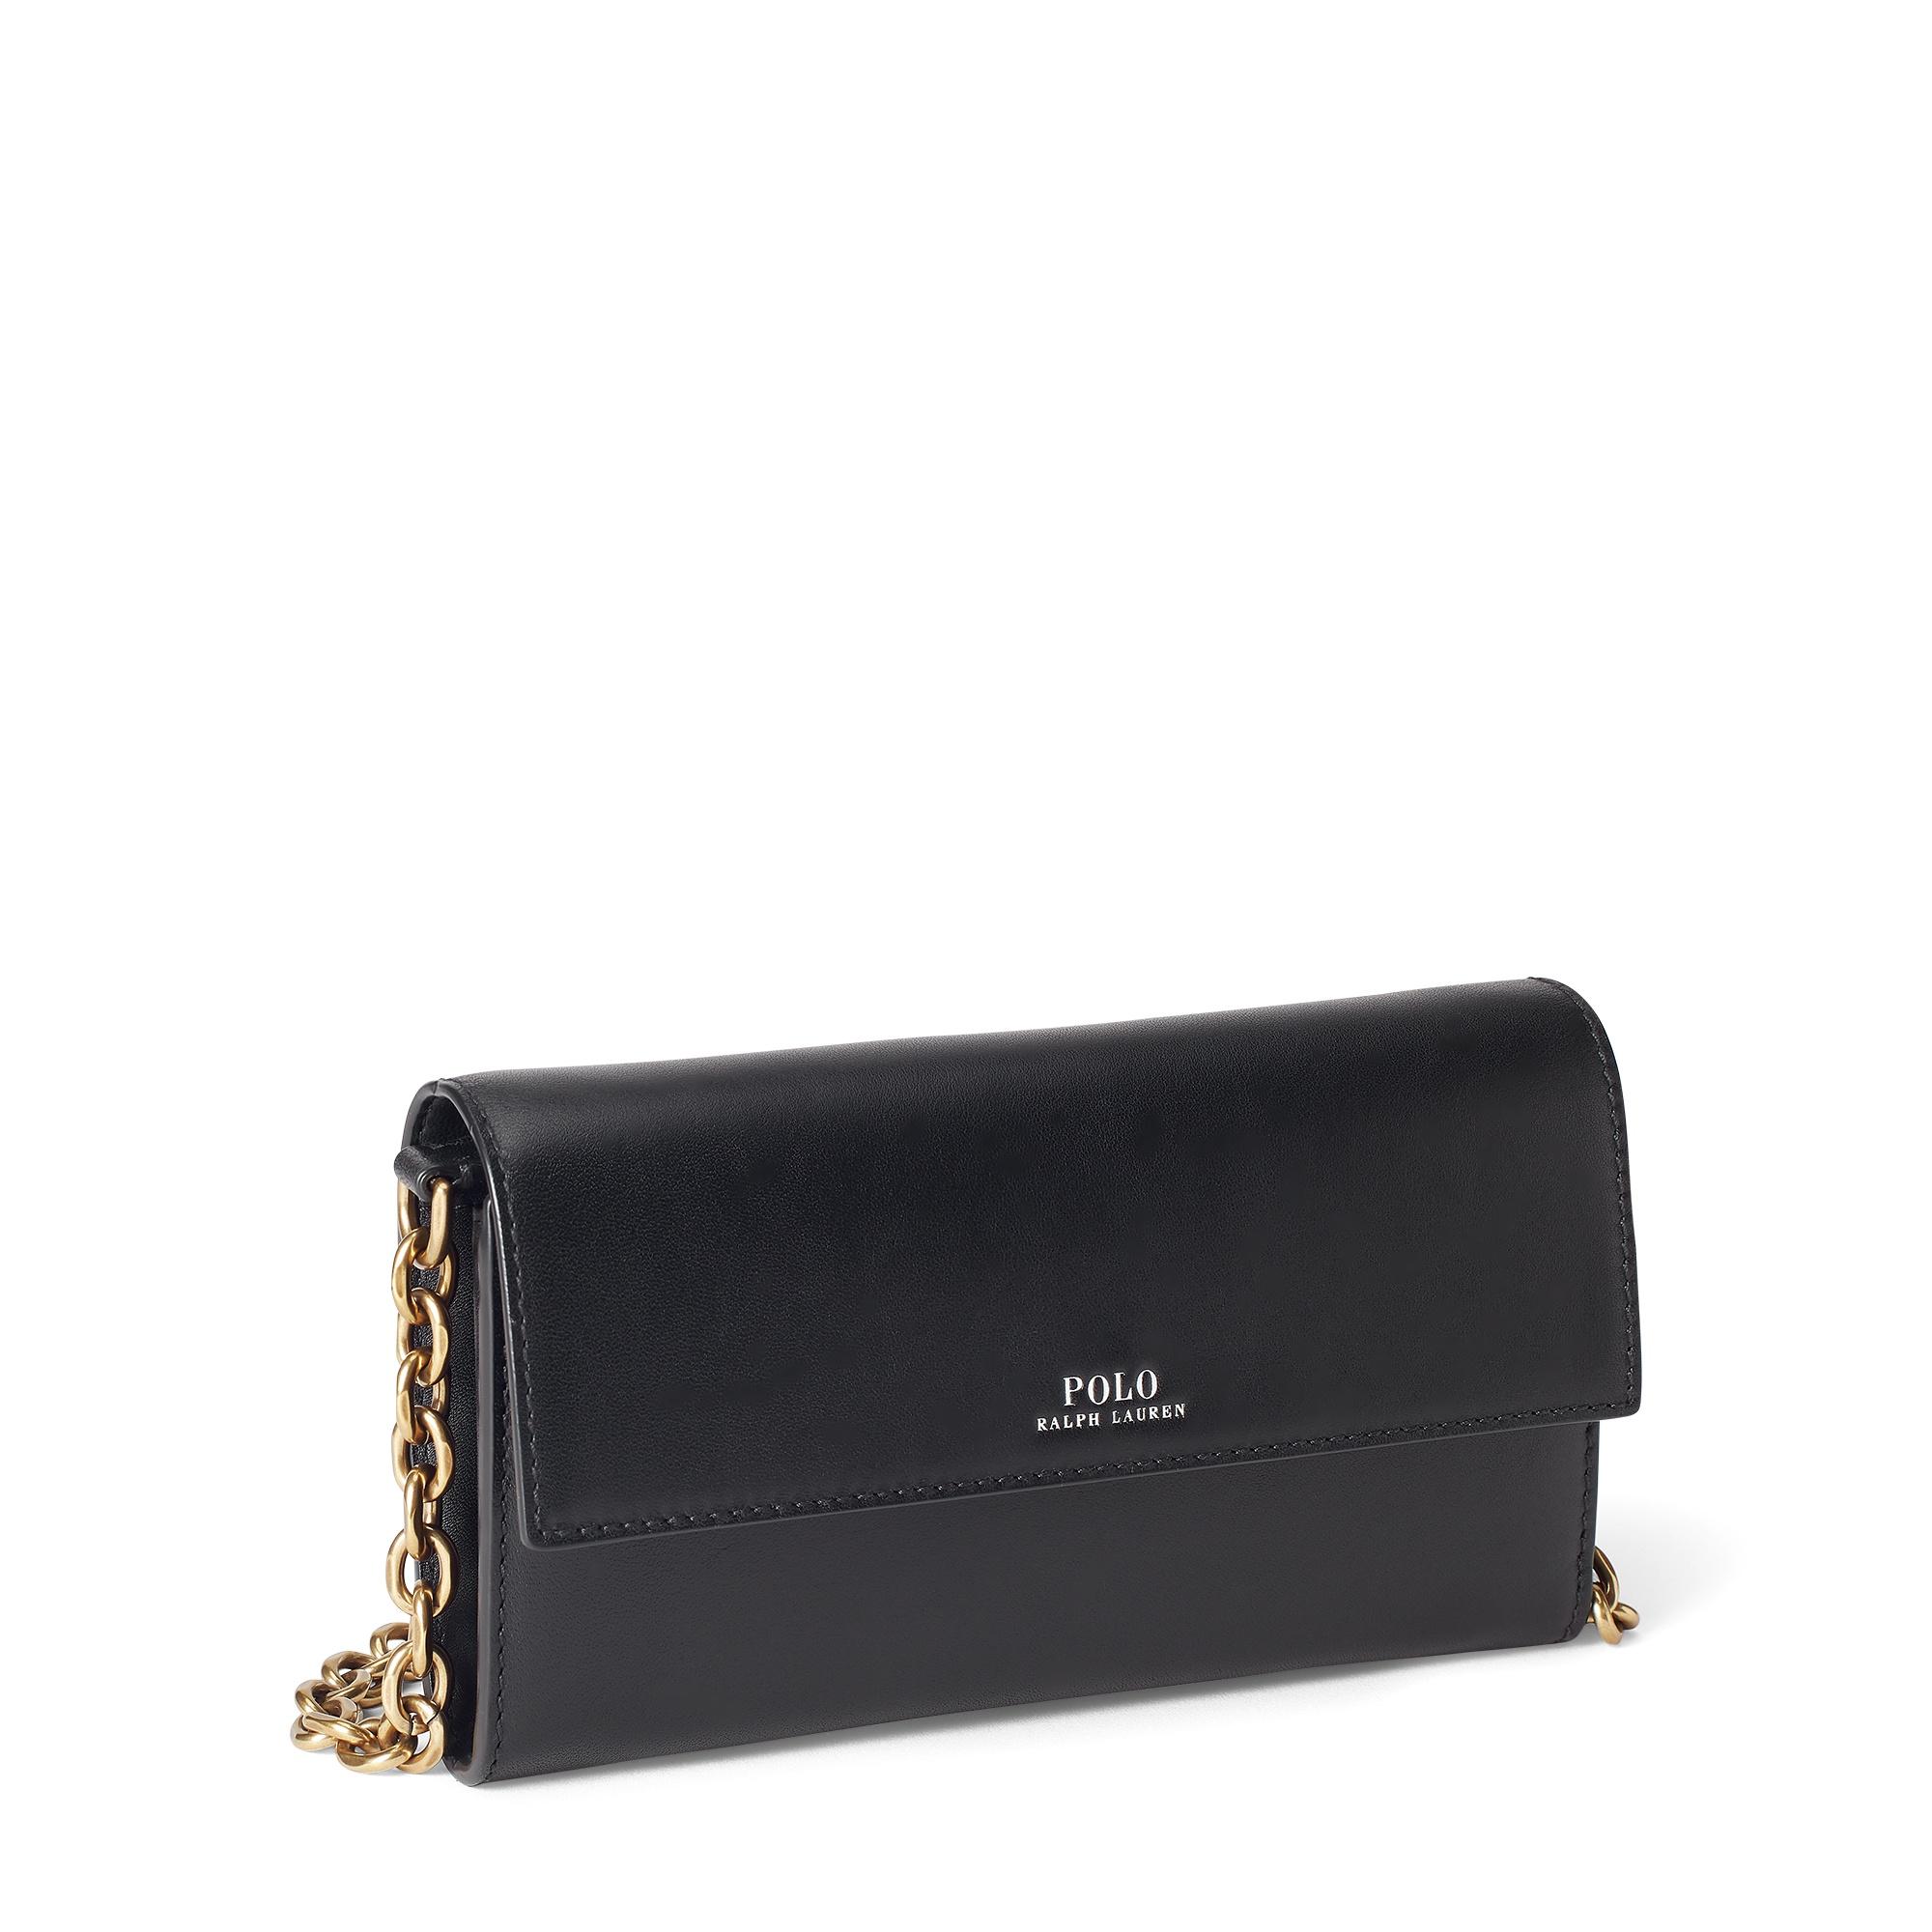 Polo Ralph Lauren Leather Small Chain Wallet in Black - Lyst